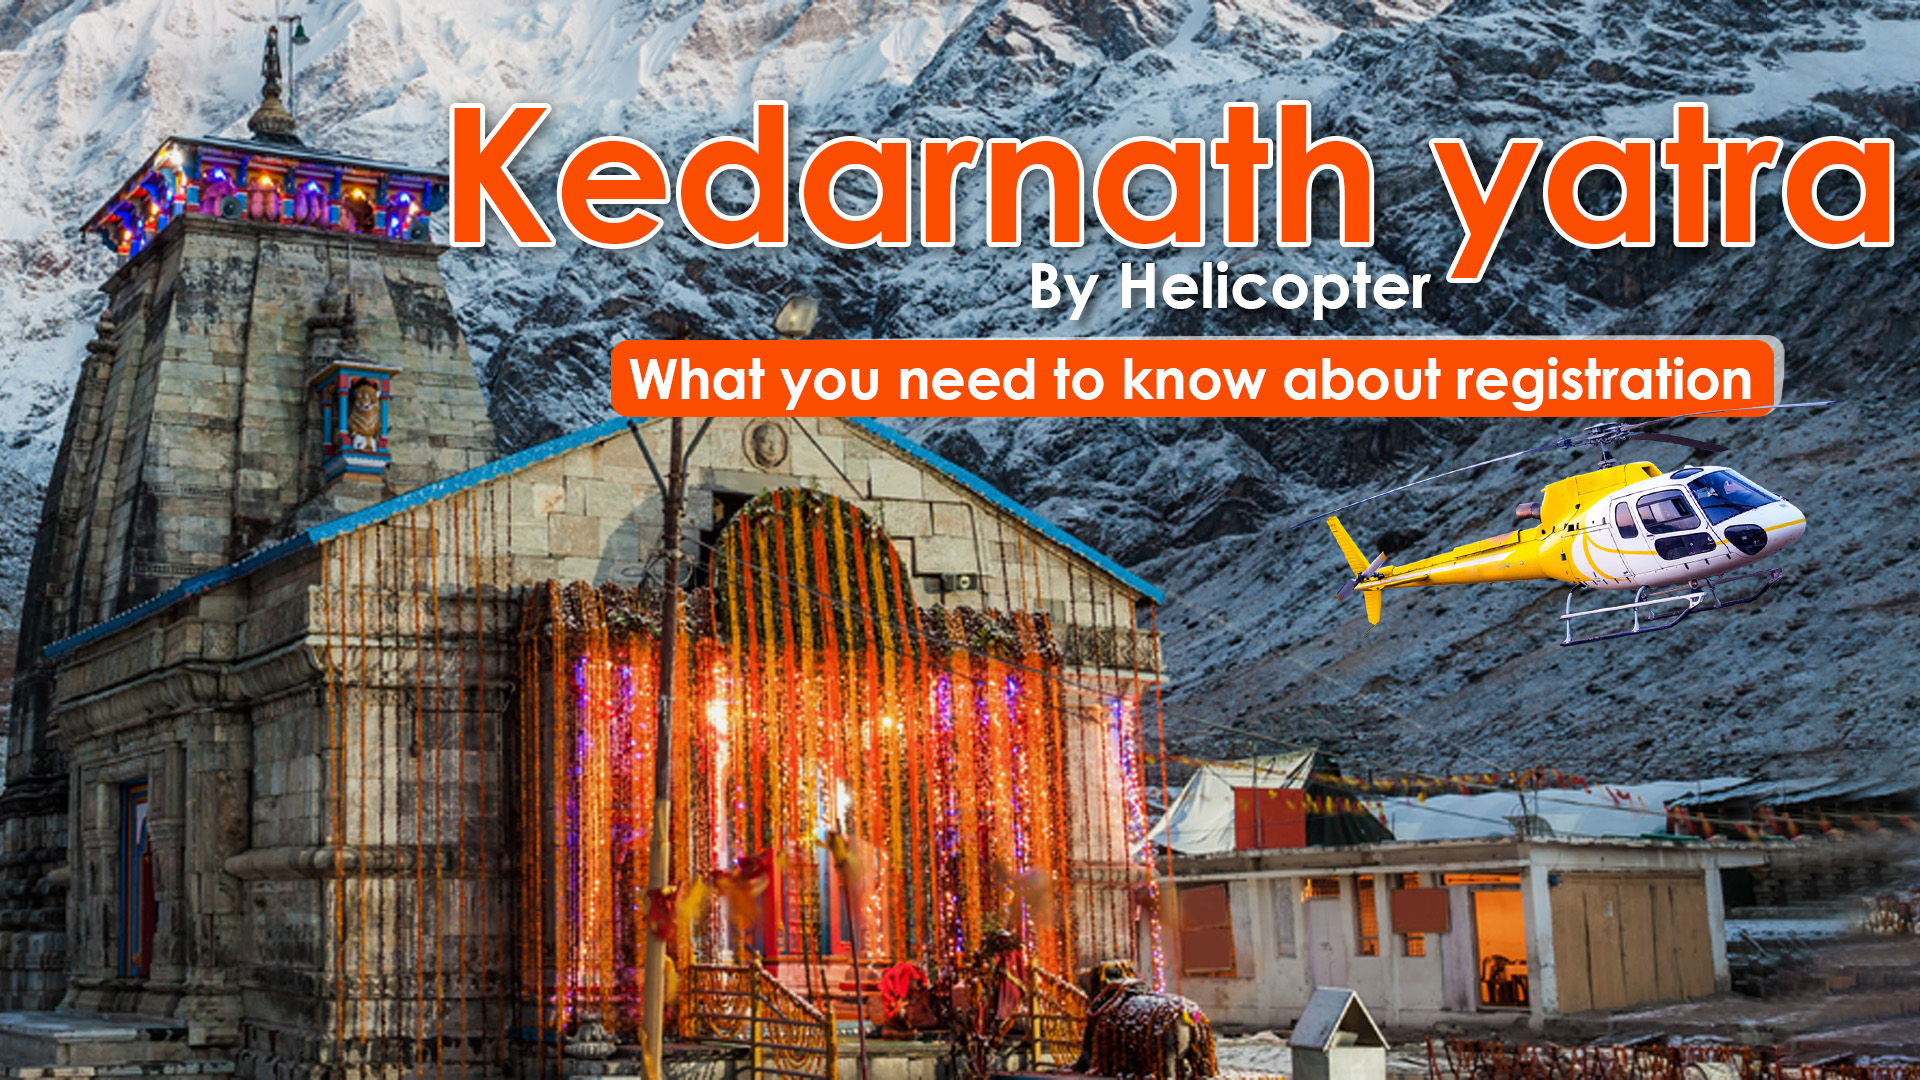 Helicopter bookings for Kedarnath set to open soon. Here is everything you need to know